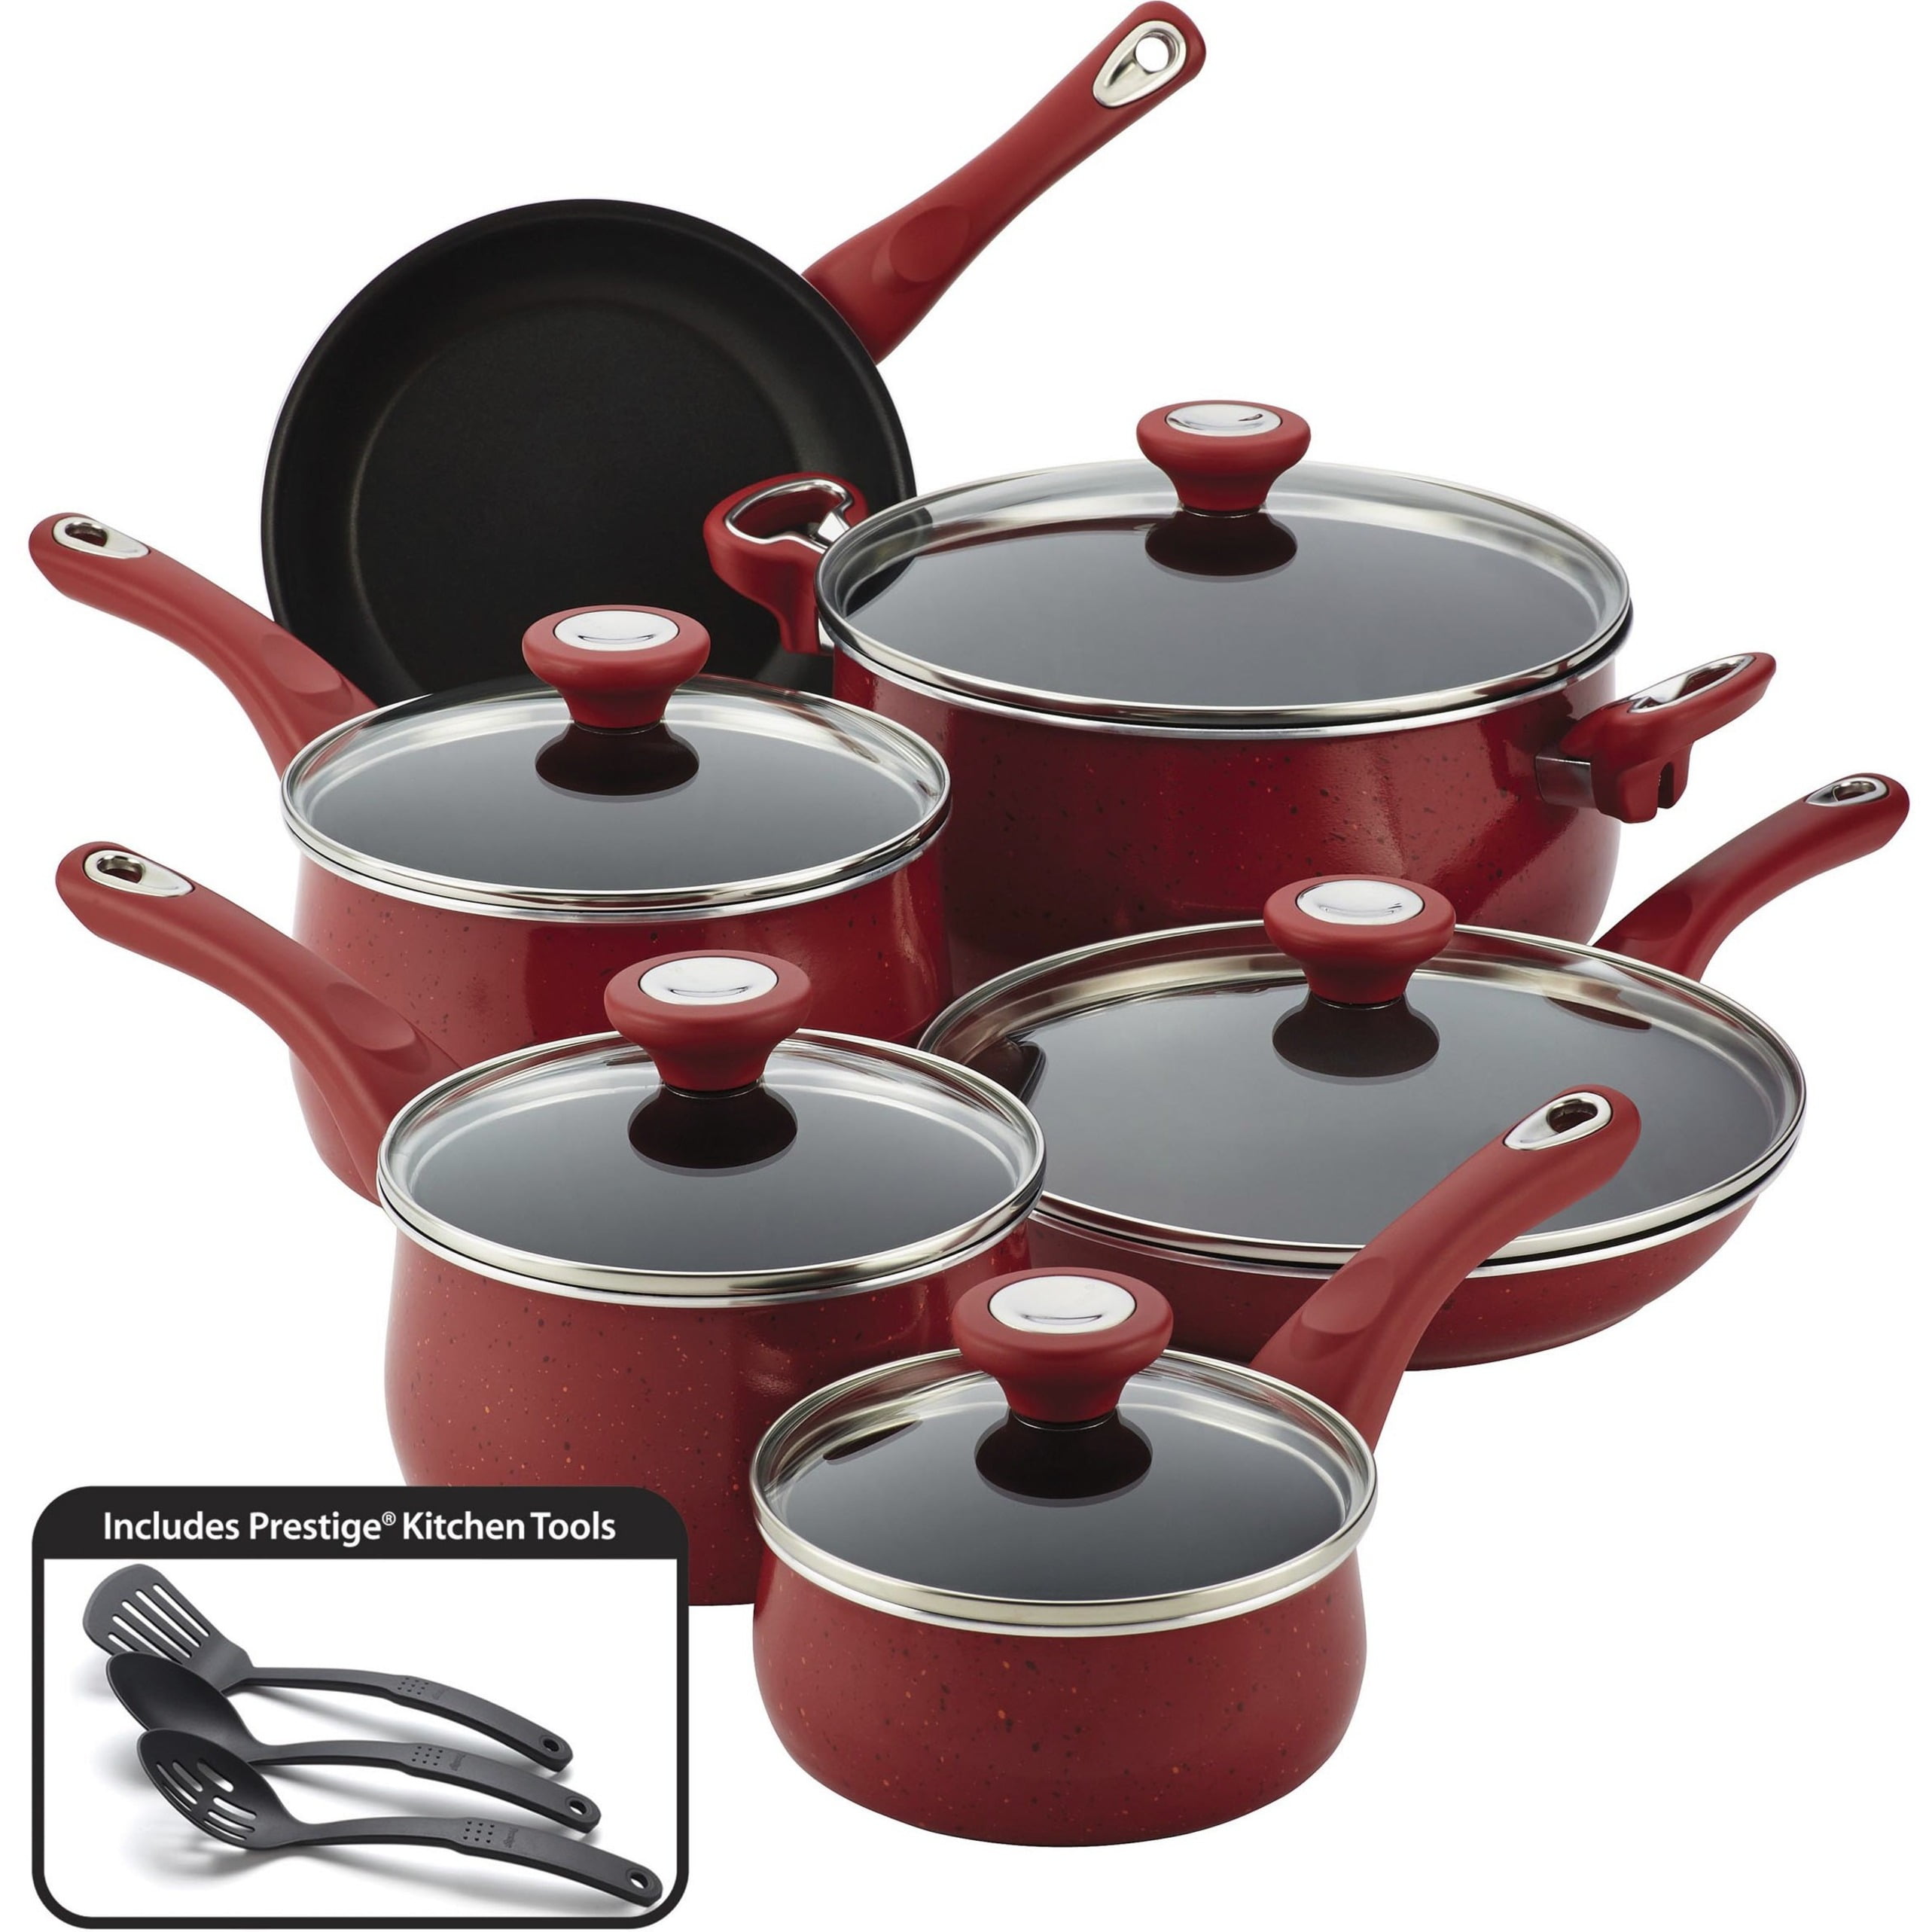 Farberware New Traditions Speckled Aluminum Nonstick 12-Piece Cookware Set  & Reviews